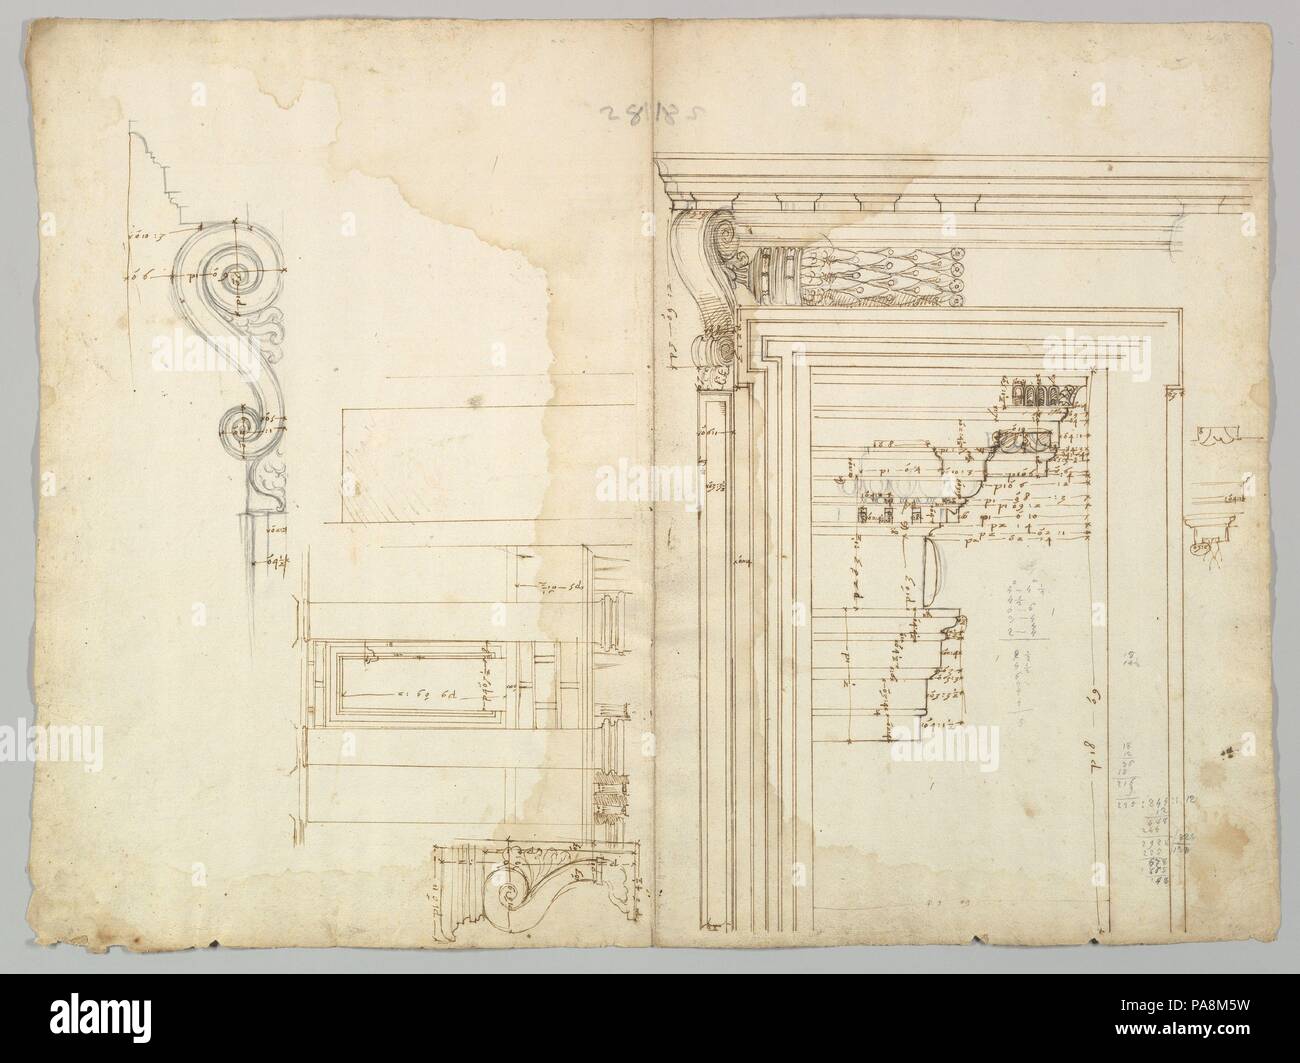 Palazzo Massimo alle Colonne, portico, elevation; portal, cornice, section; portal bracket, detail; fireplace, detail (recto) blank (verso). Dimensions: sheet: 23 1/8 x 17 1/4 in. (58.8 x 43.8 cm). Draftsman: Drawn by Anonymous, French, 16th century. Date: early to mid-16th century. Museum: Metropolitan Museum of Art, New York, USA. Stock Photo